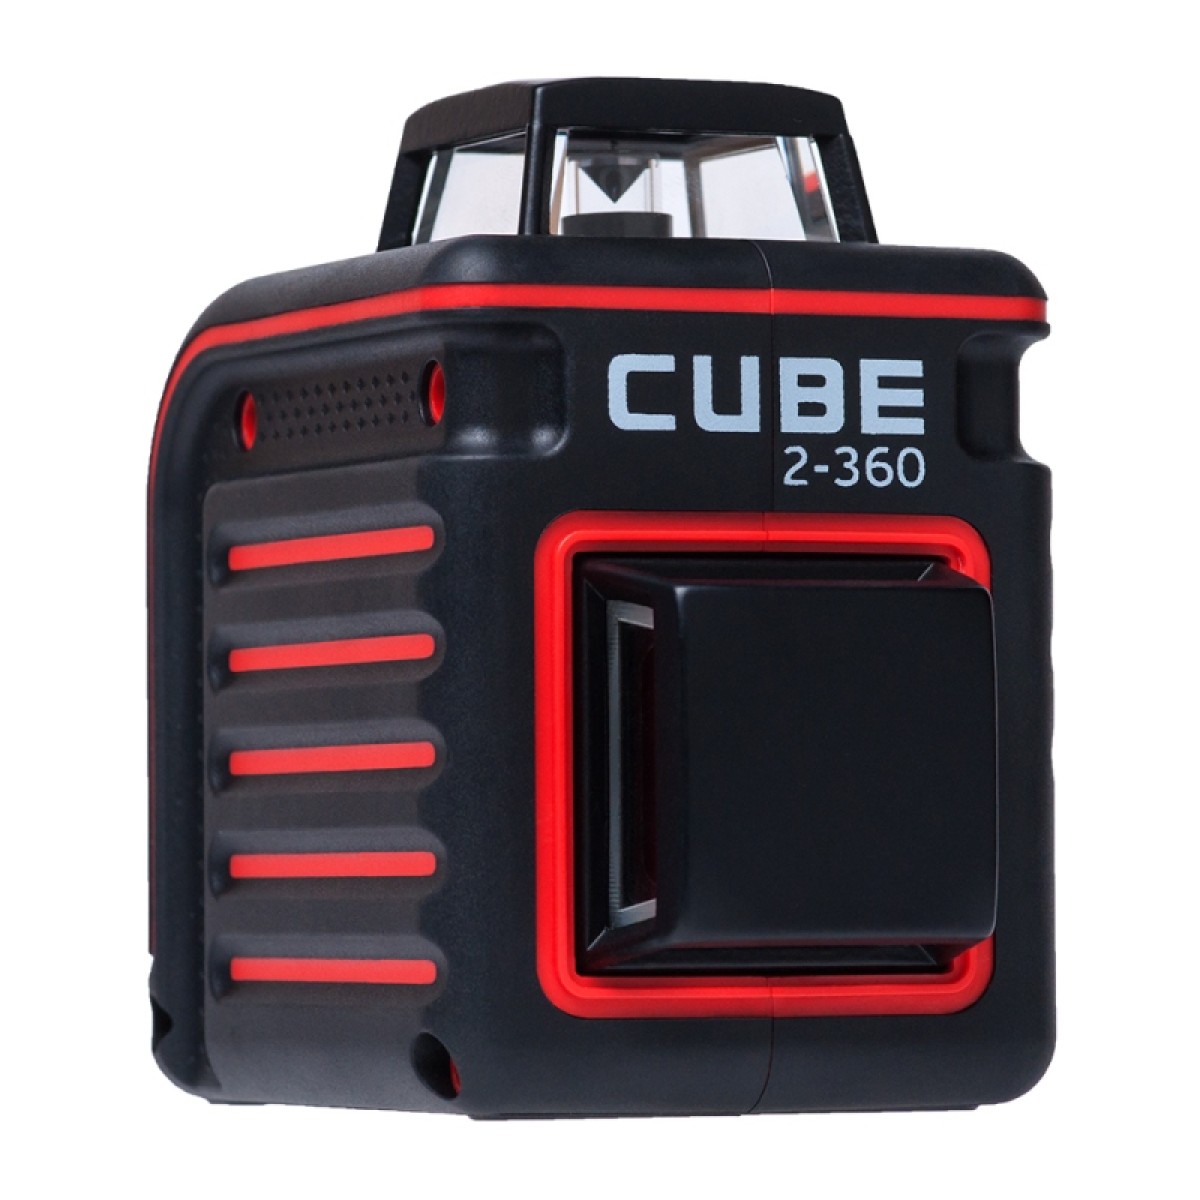 Cube 360 ultimate edition. Лазерный уровень ada Cube 360. Лазерный уровень ada Cube 2-360. Ada instruments Cube 2-360 Basic Edition. Ada Cube 2-360 professional Edition а00449.